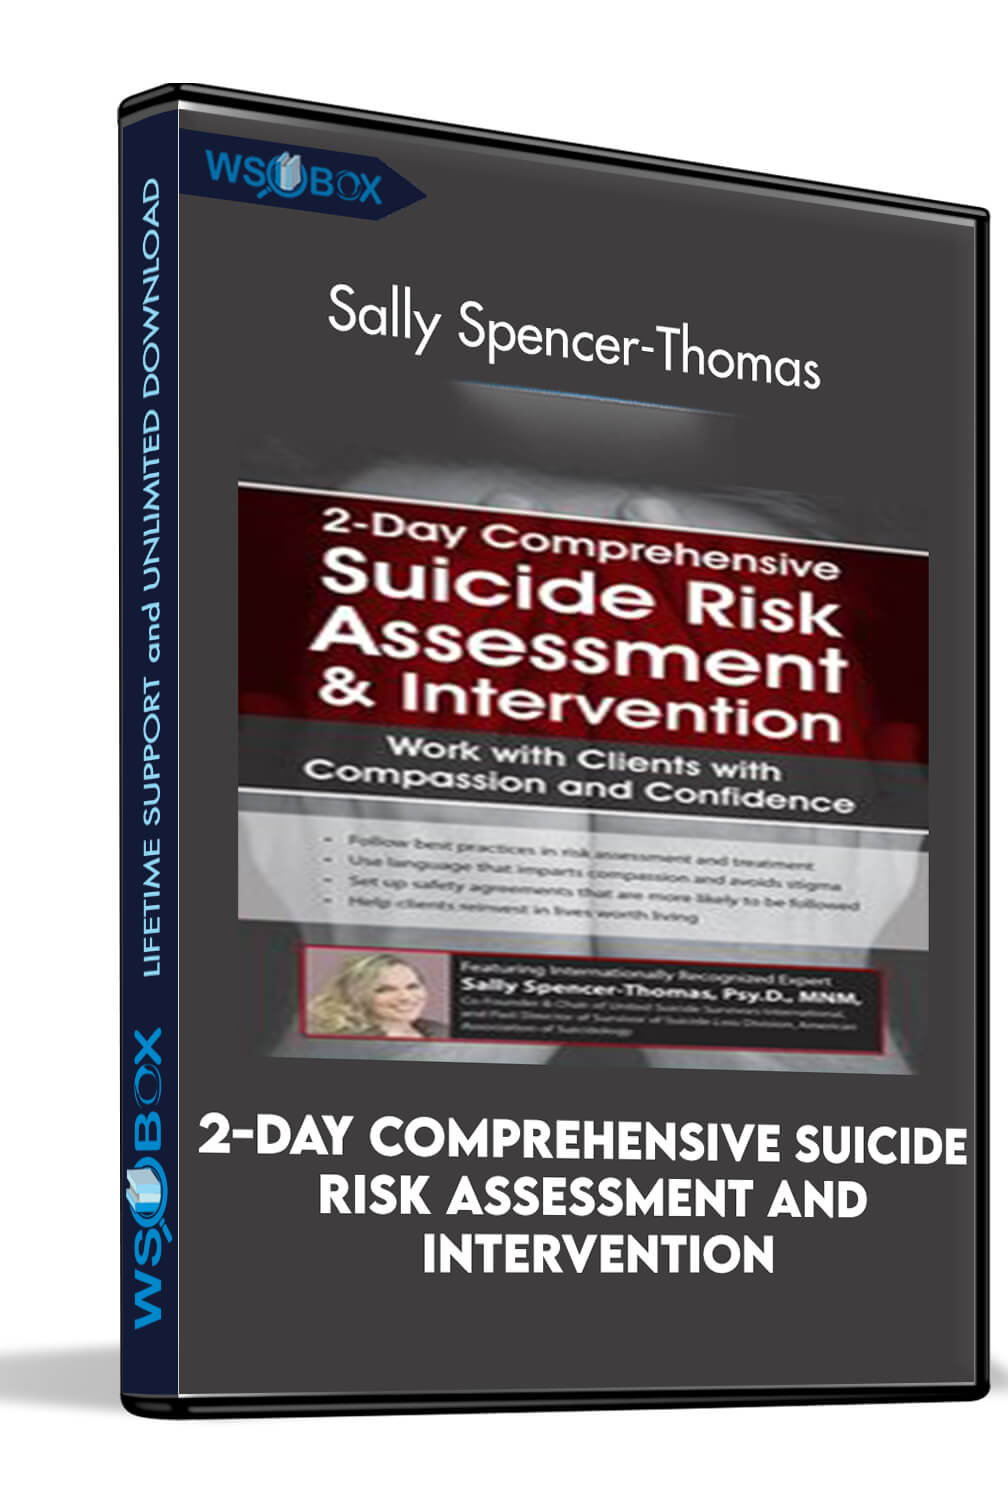 2-Day Comprehensive Suicide Risk Assessment and Intervention: Work with Clients with Compassion and Confidence - Sally Spencer-Thomas